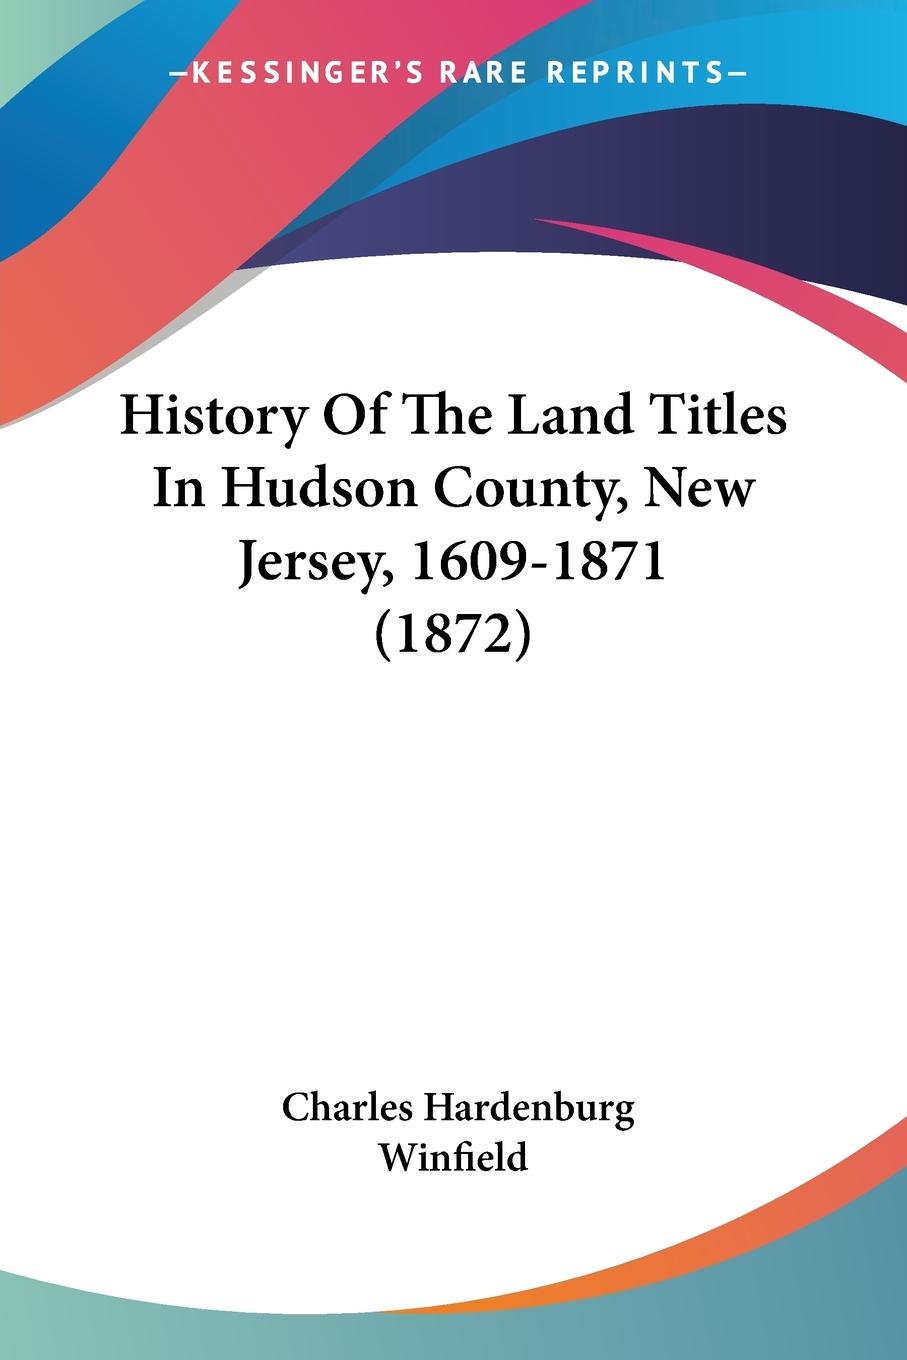 History Of The Land Titles In Hudson County, New Jersey, 1609-1871 (1872) - Winfield, Charles Hardenburg